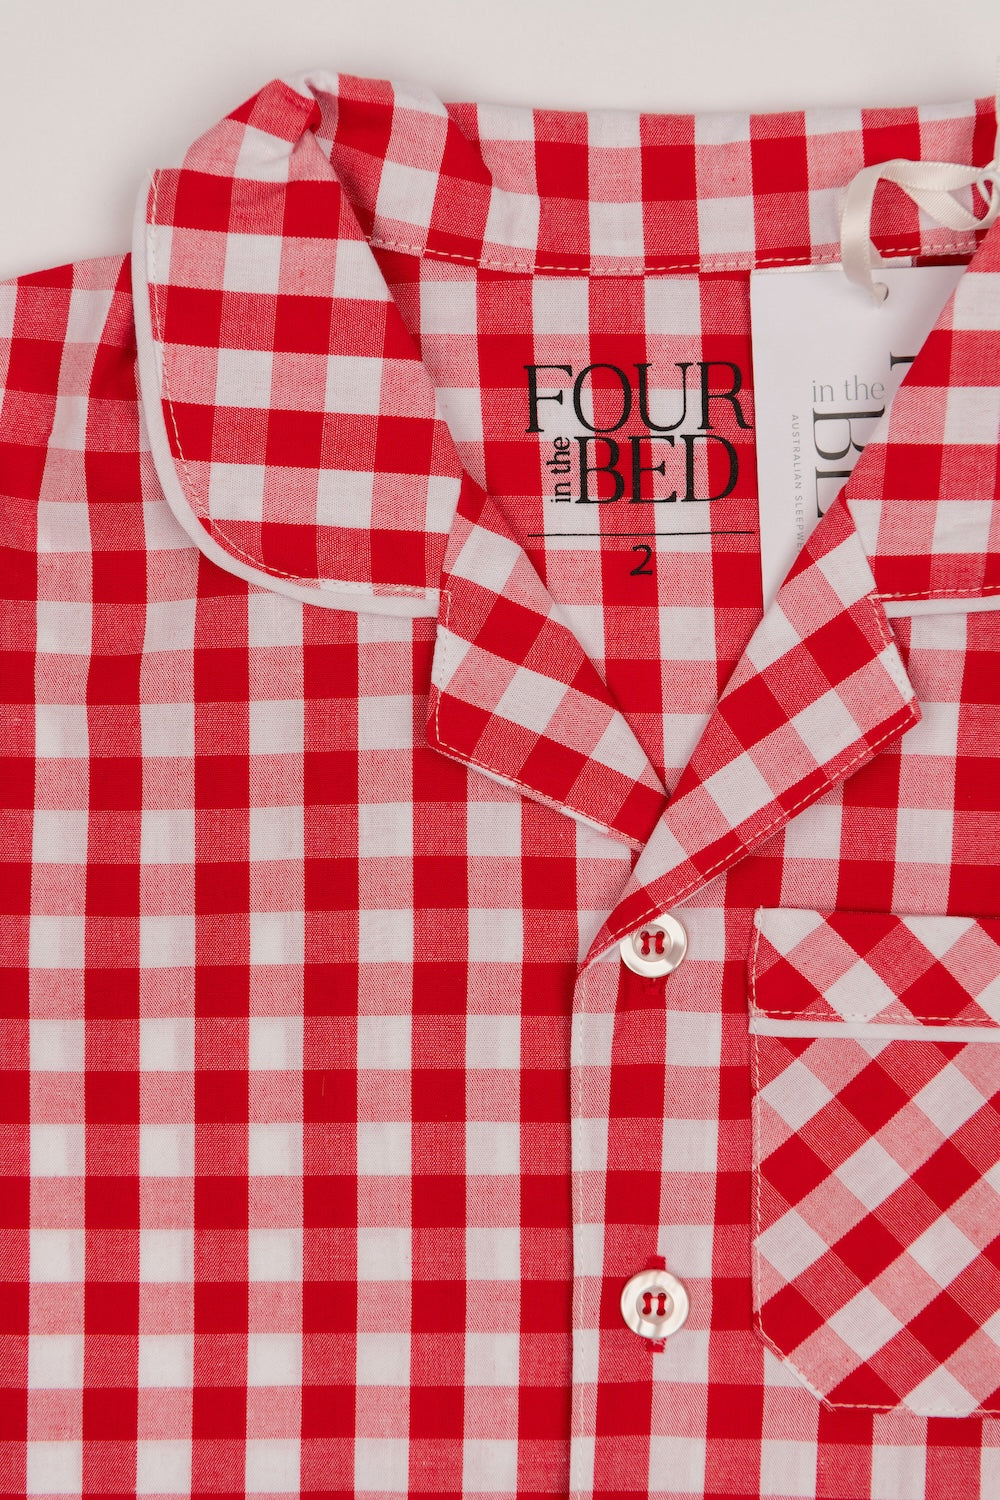 100% woven cotton summer pyjamas - Classic red gingham check